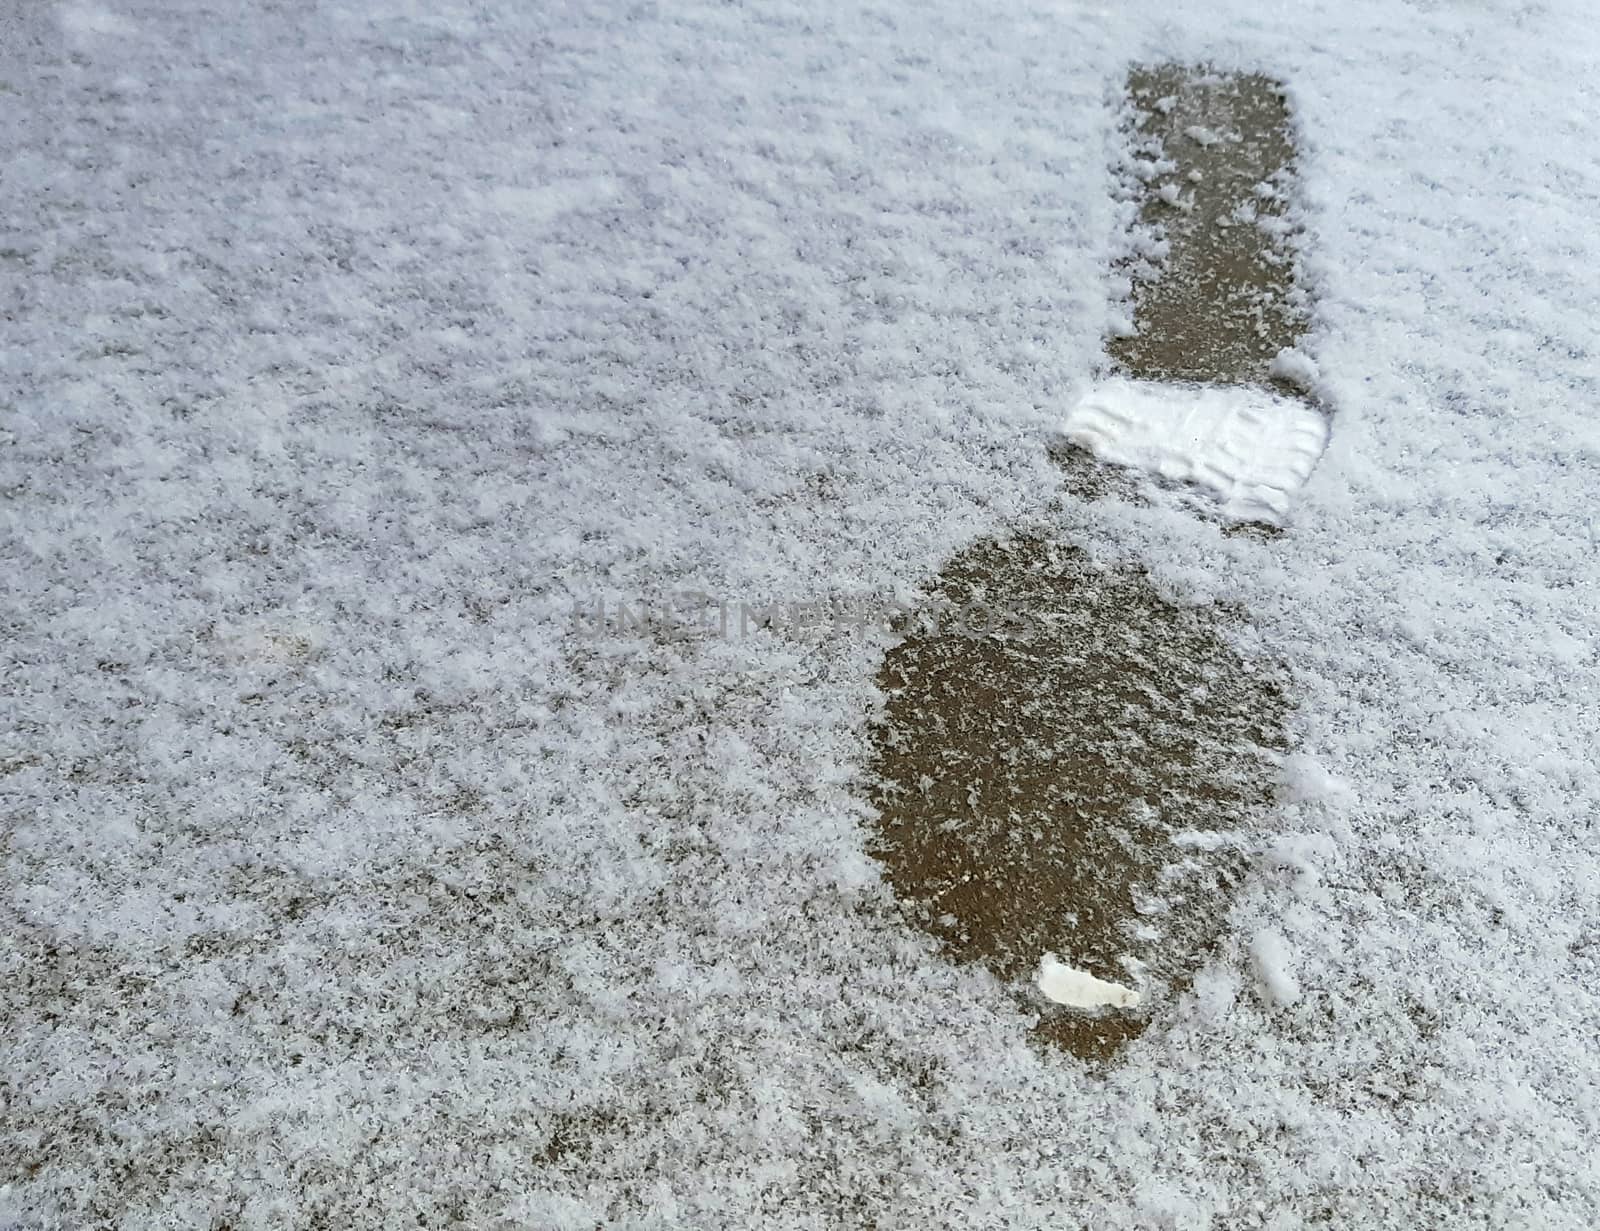 Human footprints in the snow, winter background.